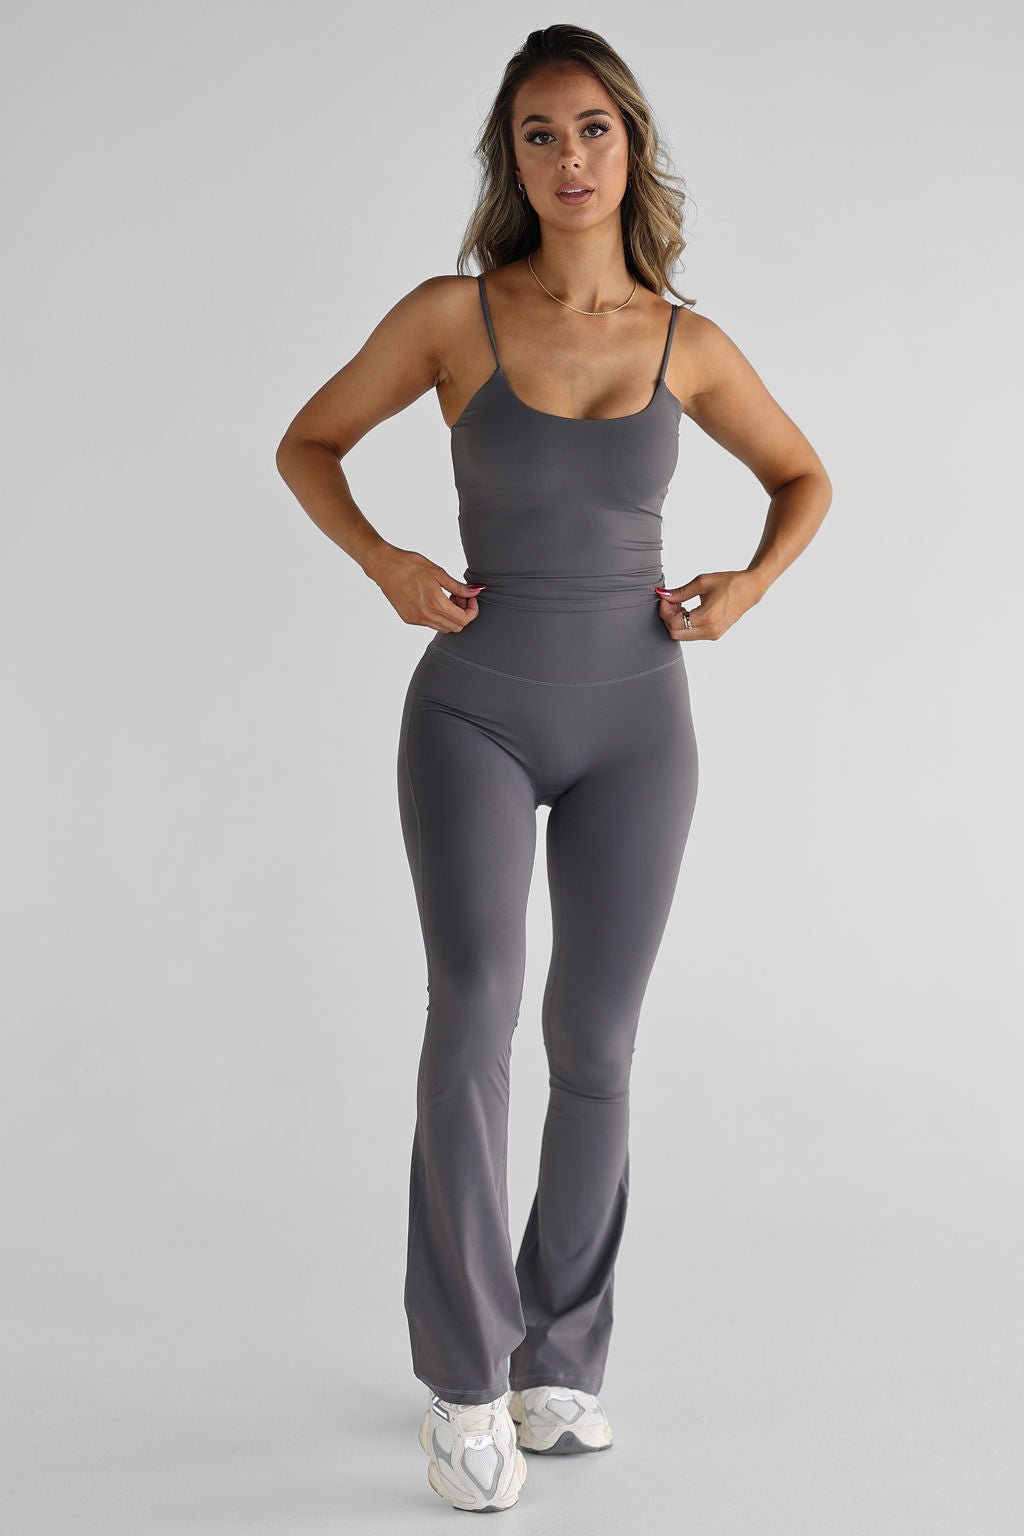 Up Flare Leggings Charcoal Gray (Custom-Made) – CLS Sportswear